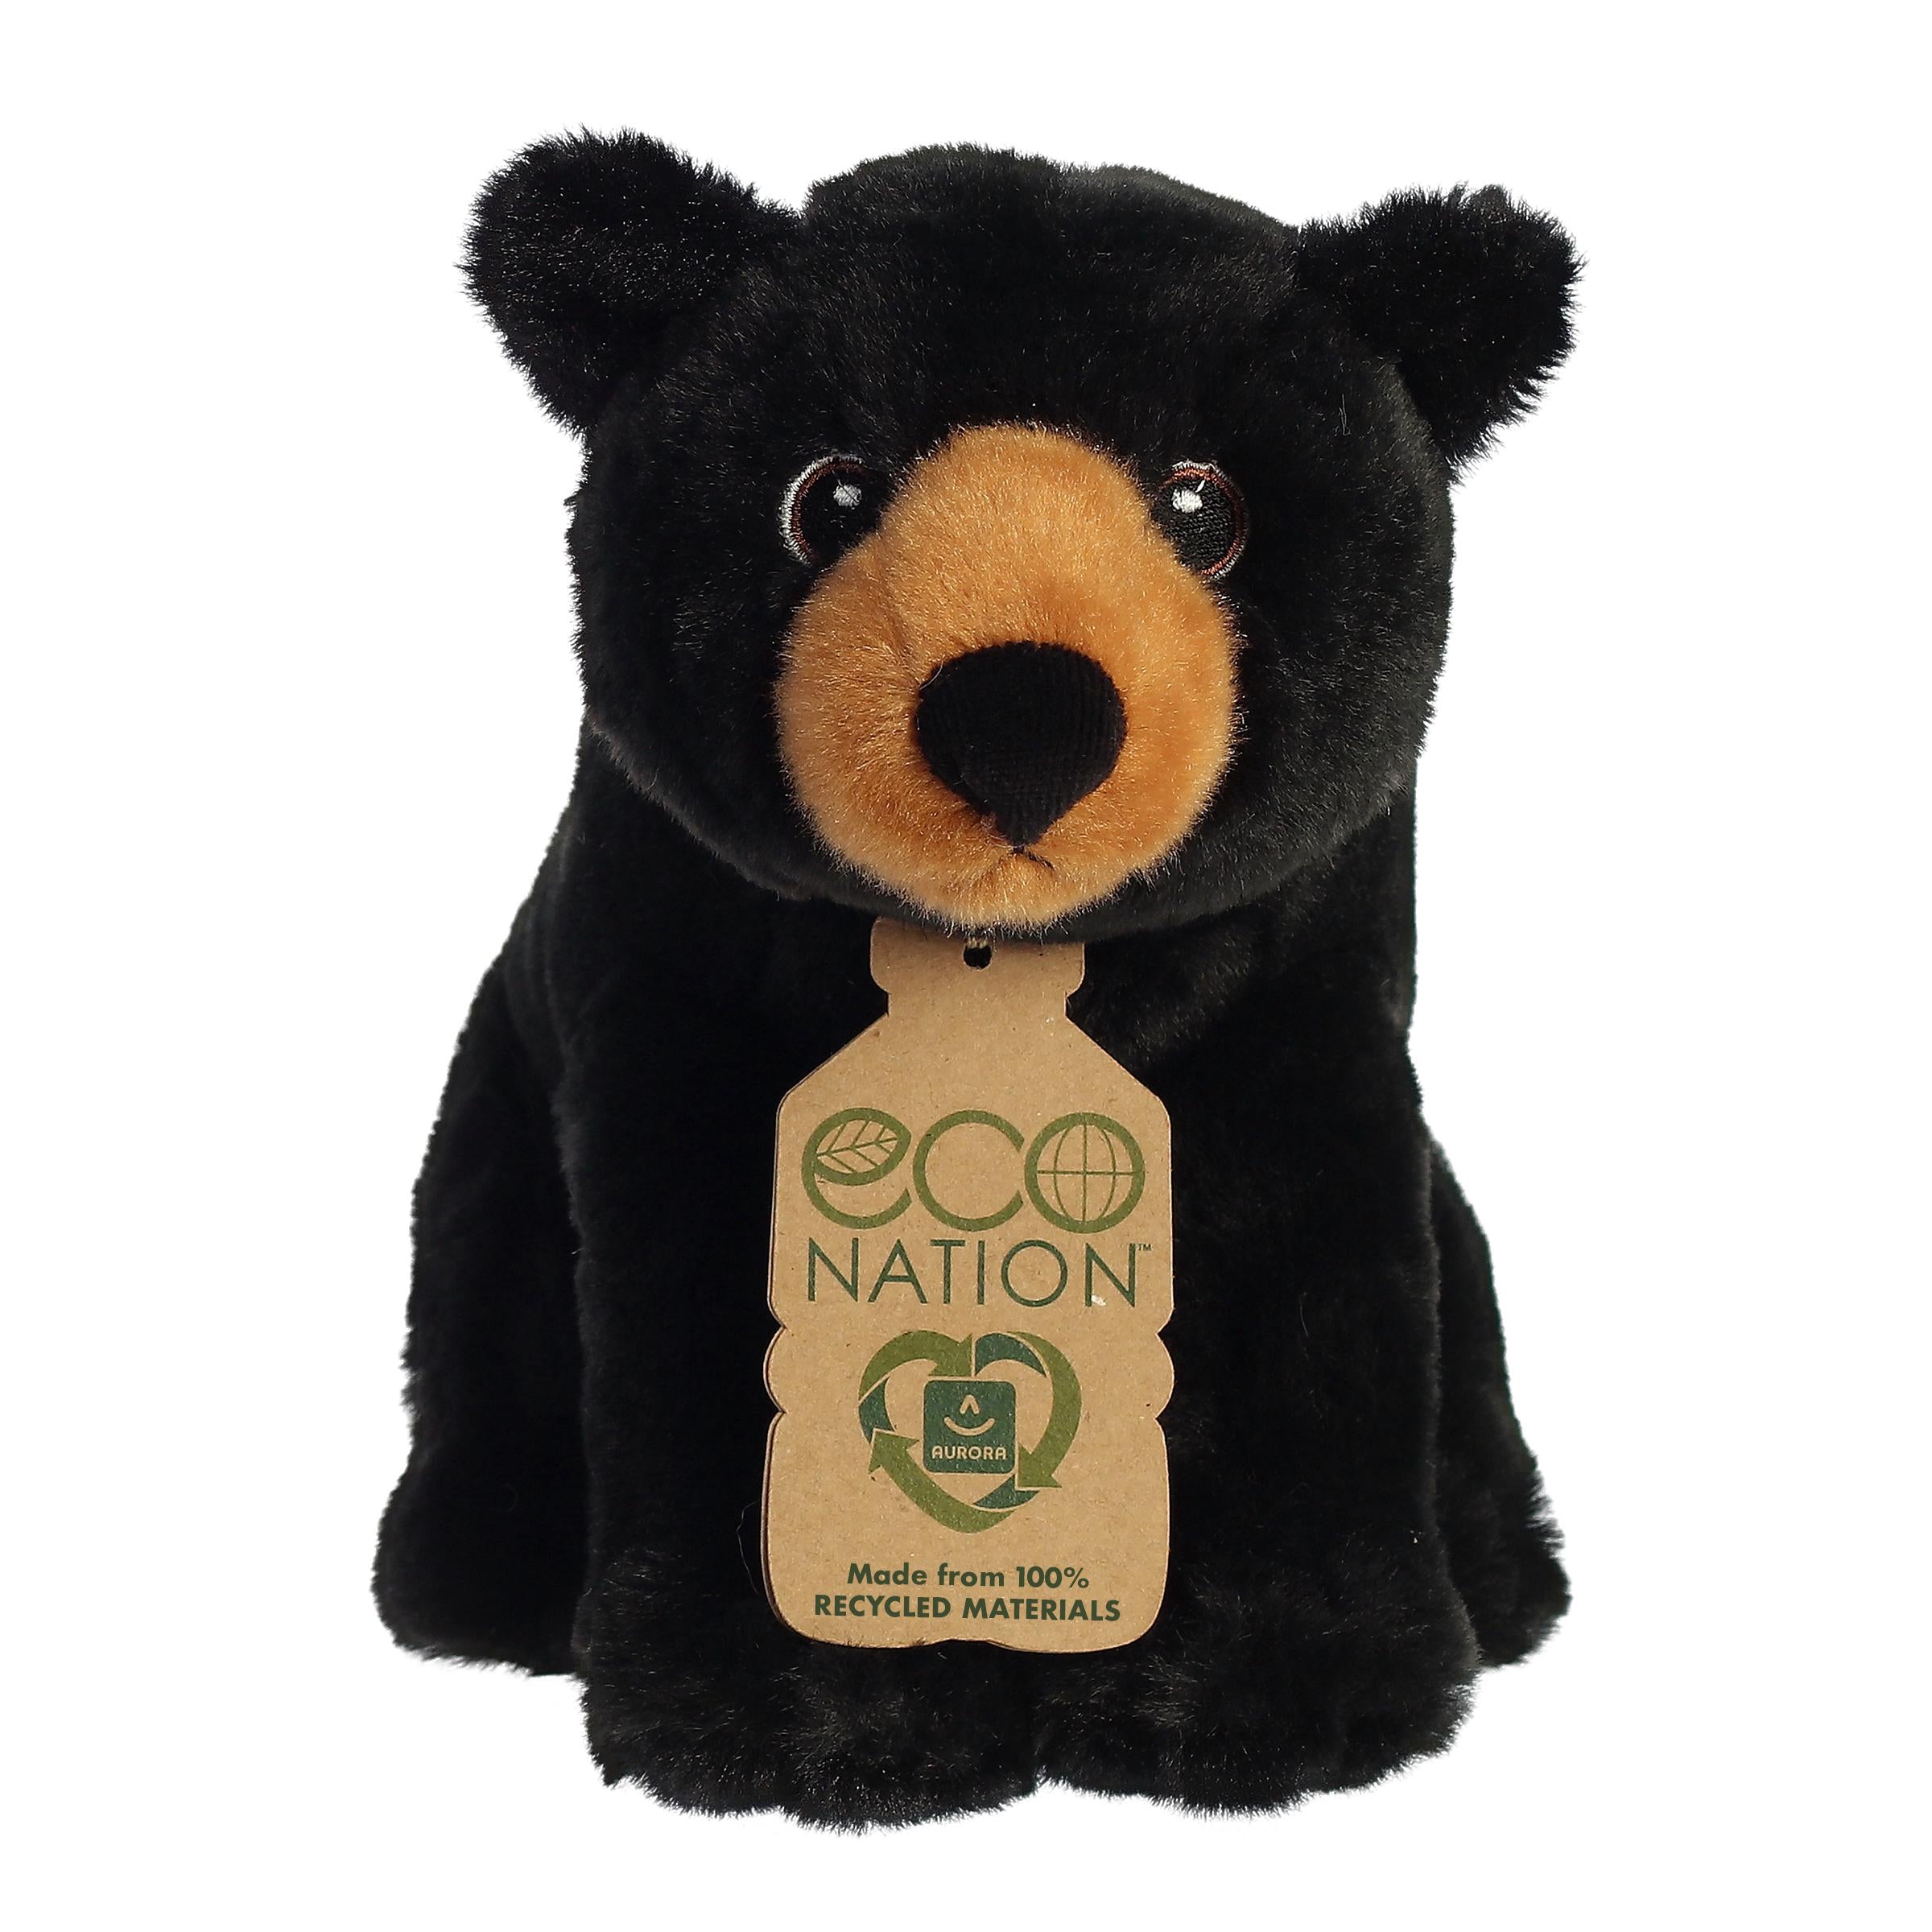 A delightful black bear plush with a rich black coat, brown snout, embroidered eyes, and an eco-nation tag around its neck